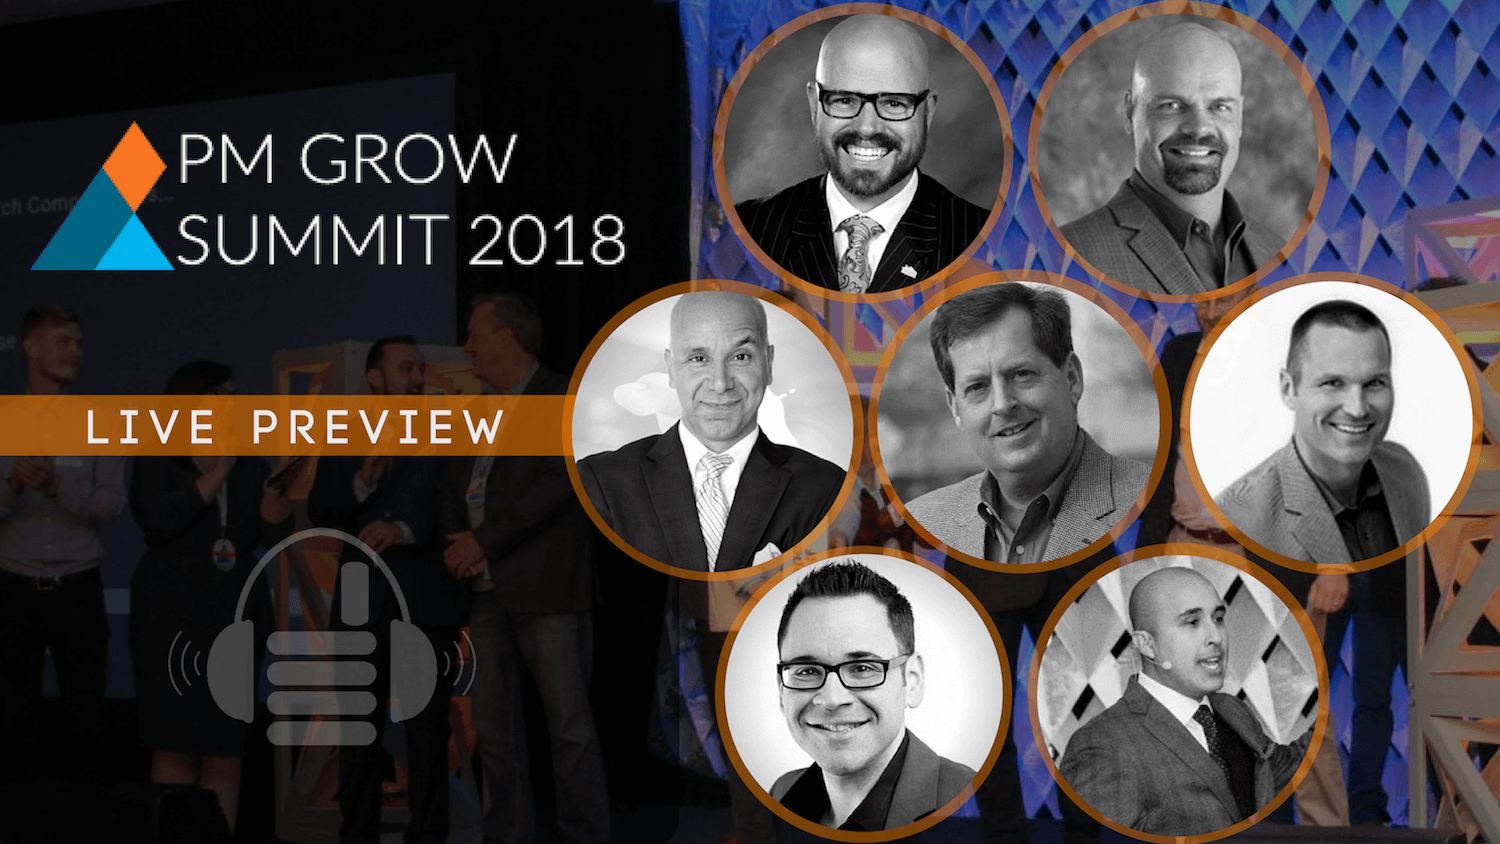 Who’s Who at the PM Grow Summit 2018 - A Facebook Live Podcast and Preview | Fourandhalf